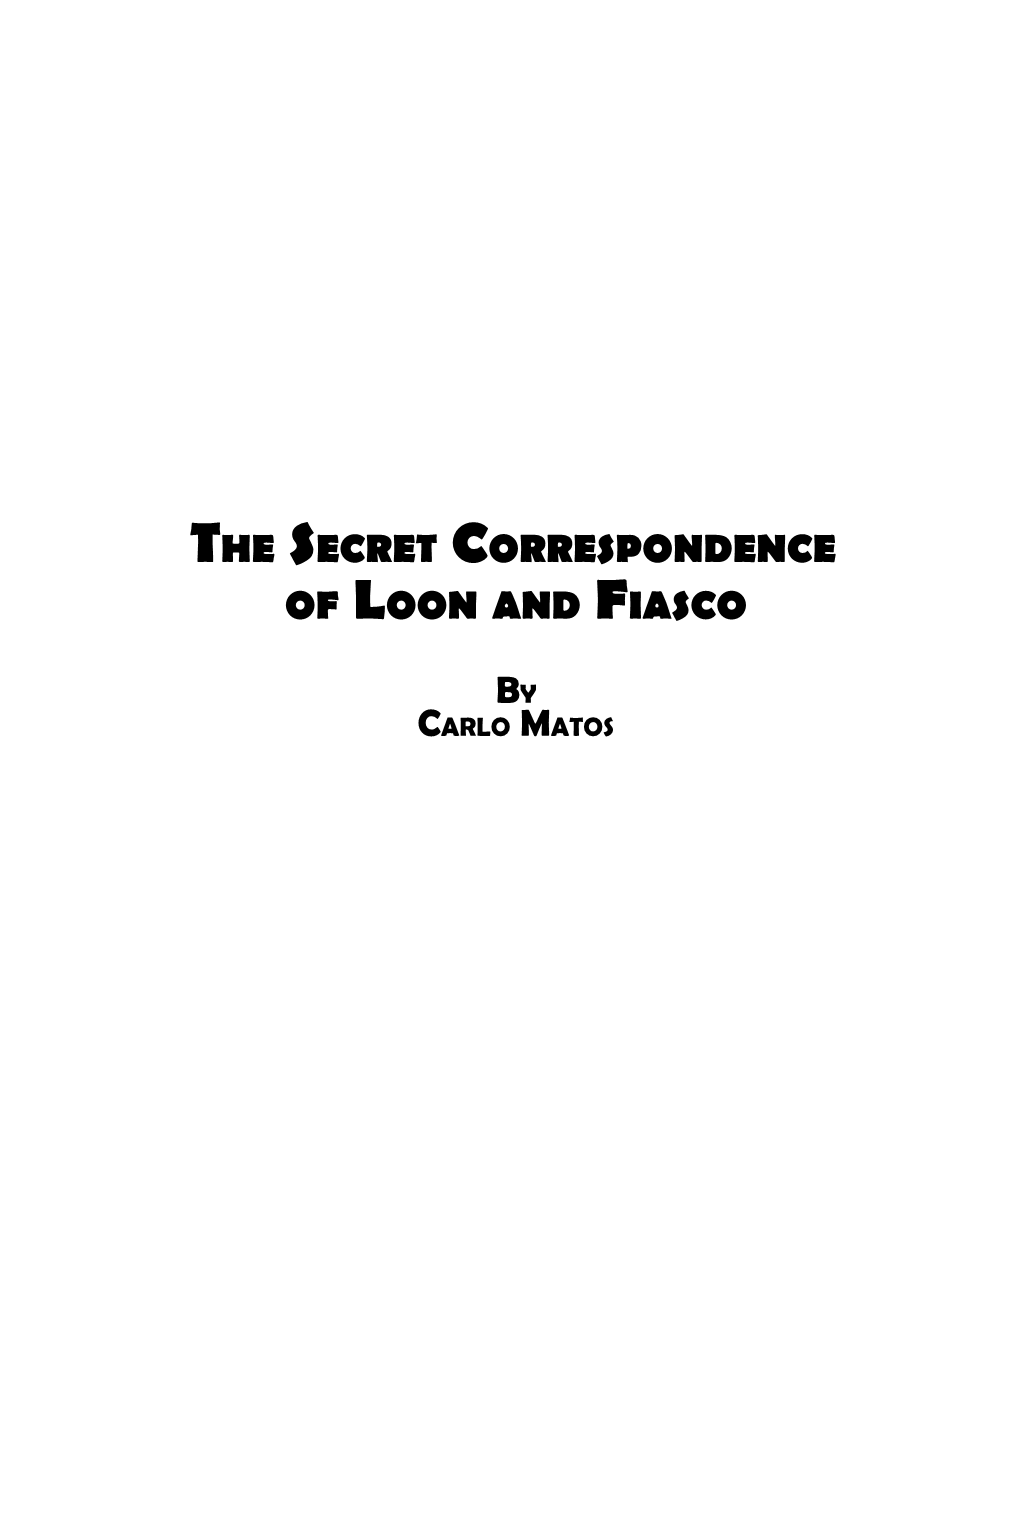 The Secret Correspondence of Loon and Fiasco